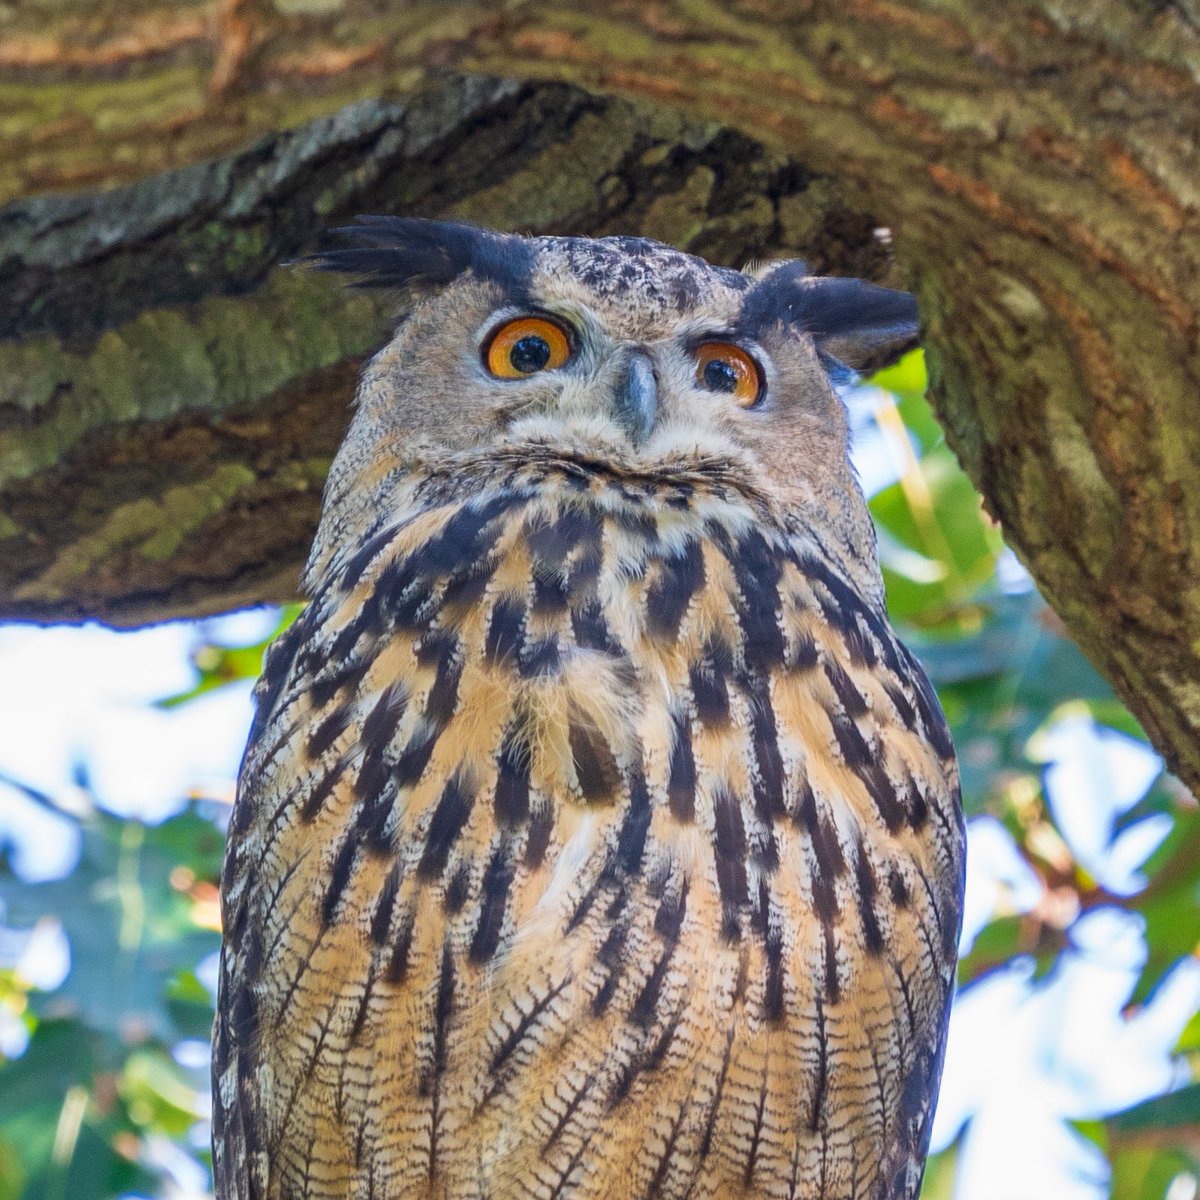 Would love to see a bronze statue of Flaco in Central Park. 🕊️Rest in Peace 🕊️ @CentralParkNYC #flacotheowl #flaco #birdcp